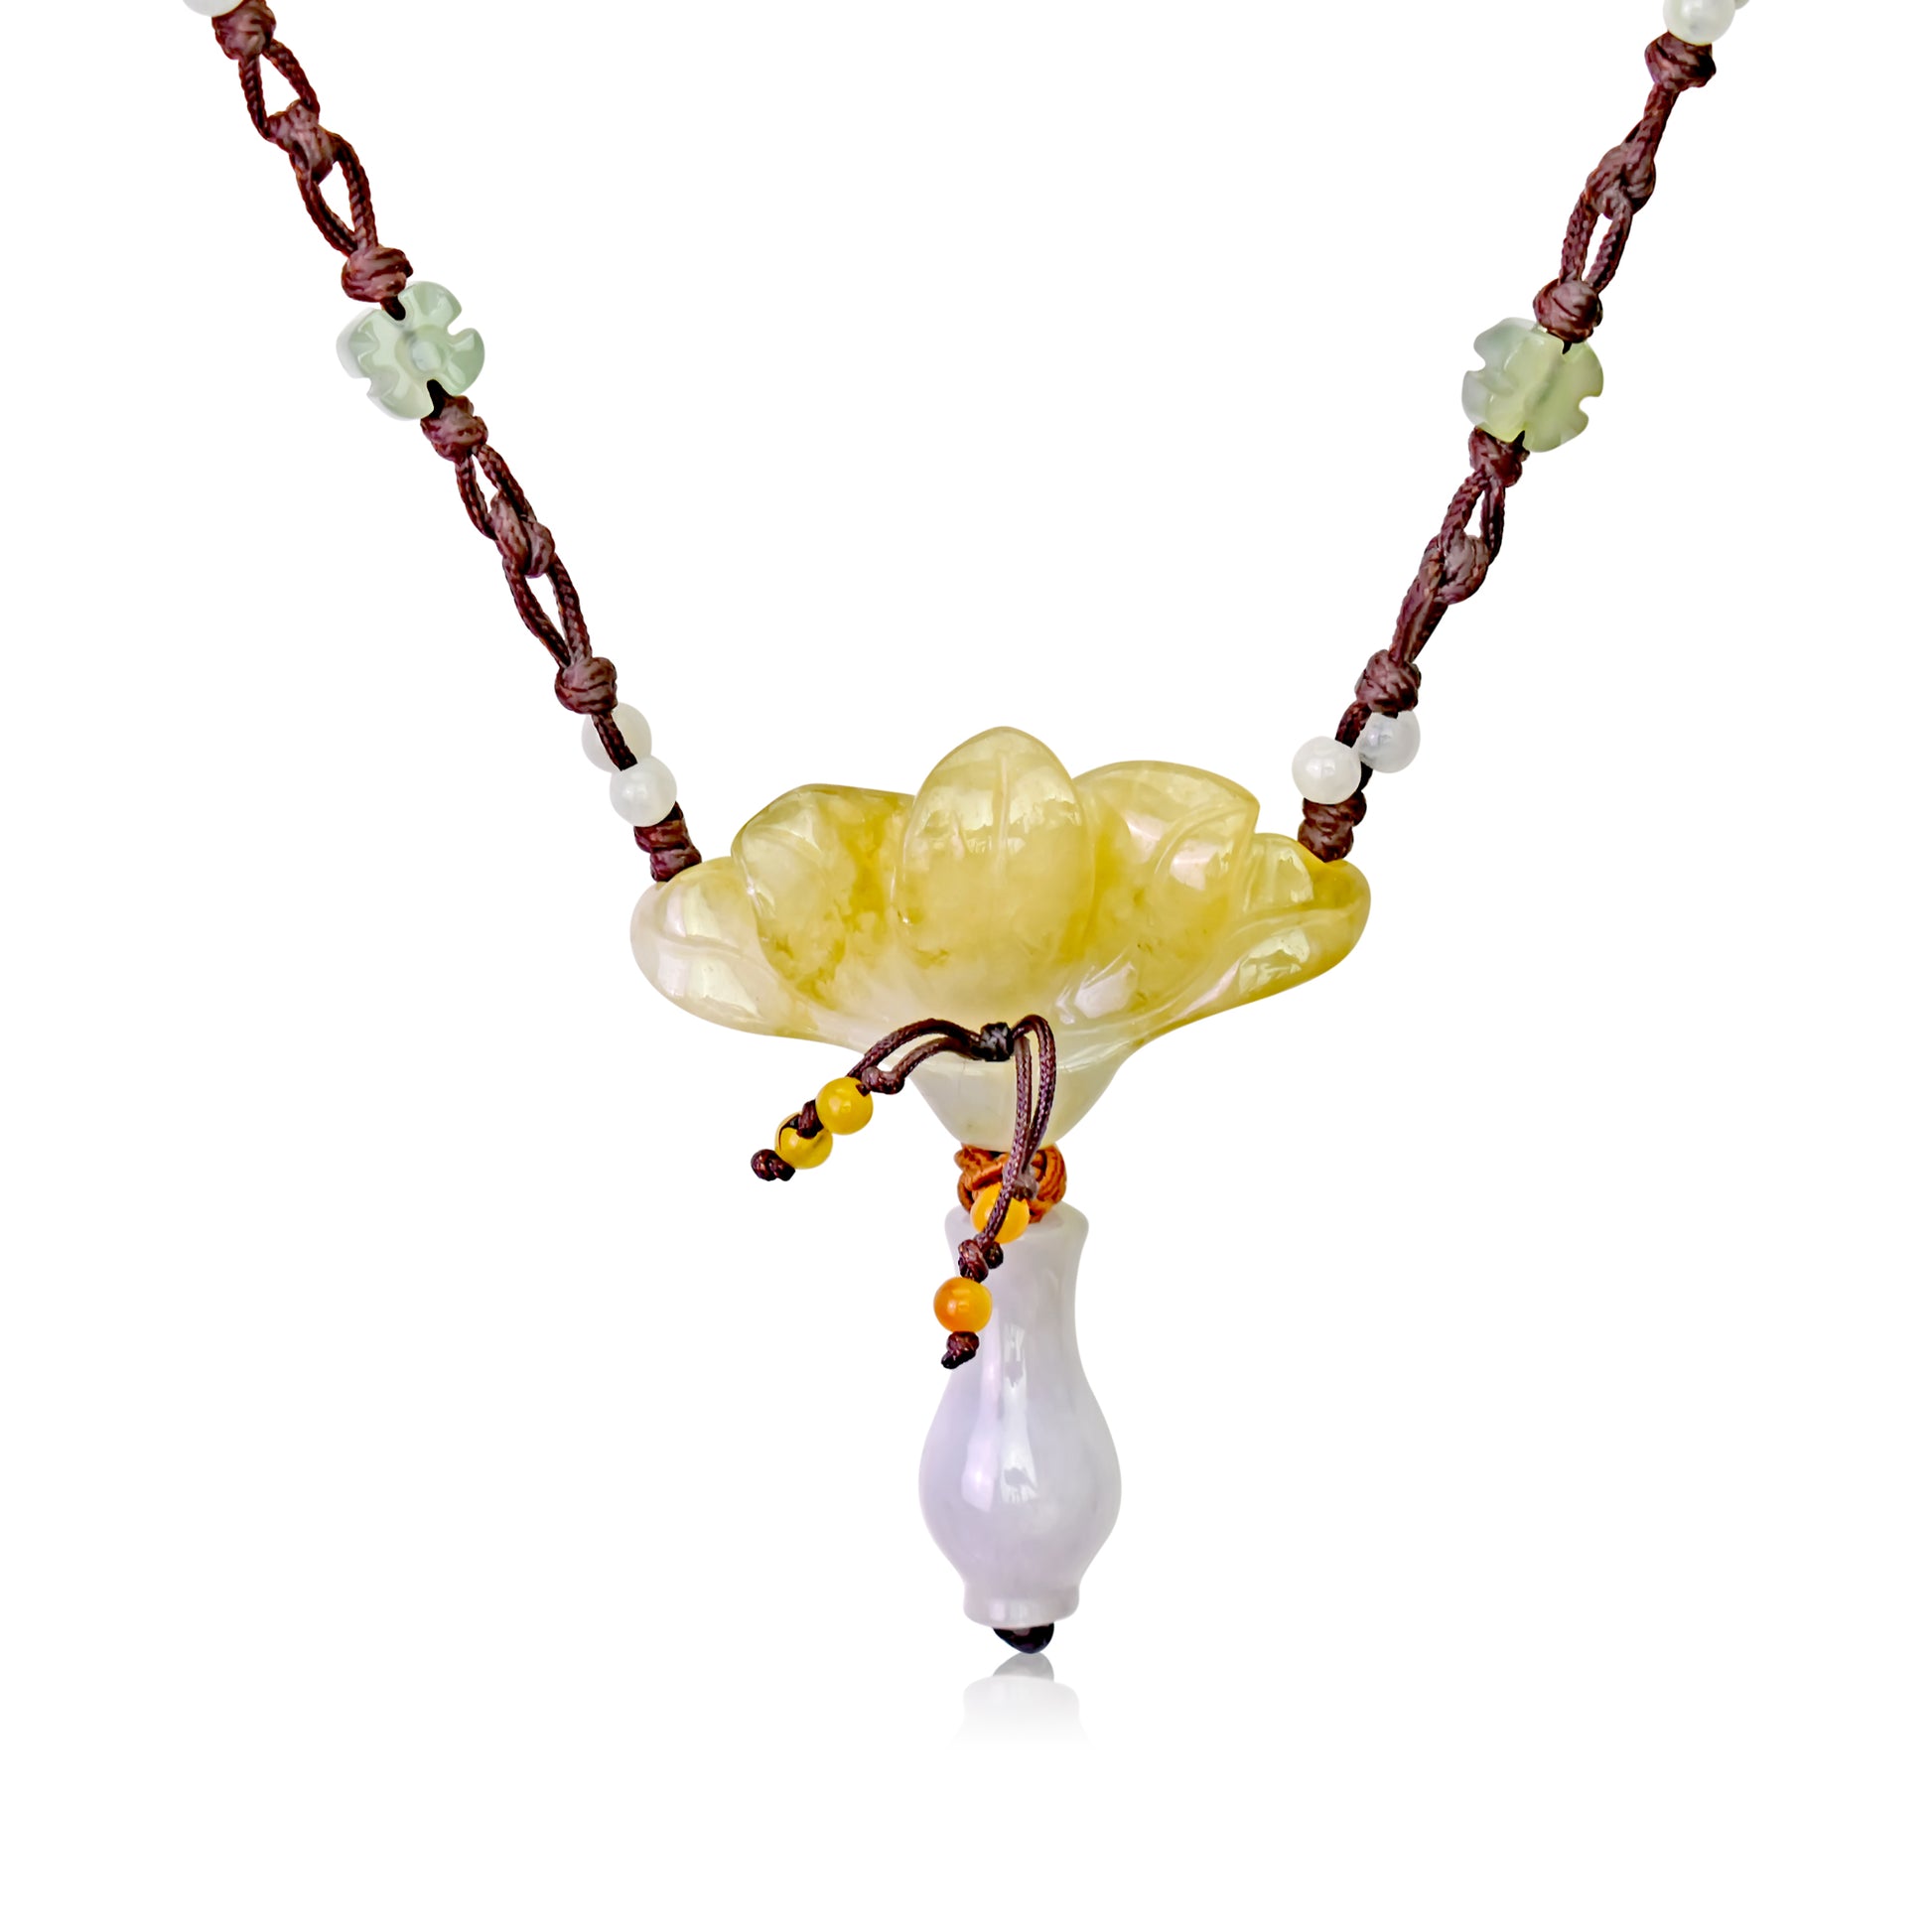 Make Your Wishes Come True with the Peacock Flower Jade Necklace made with Brown Cord